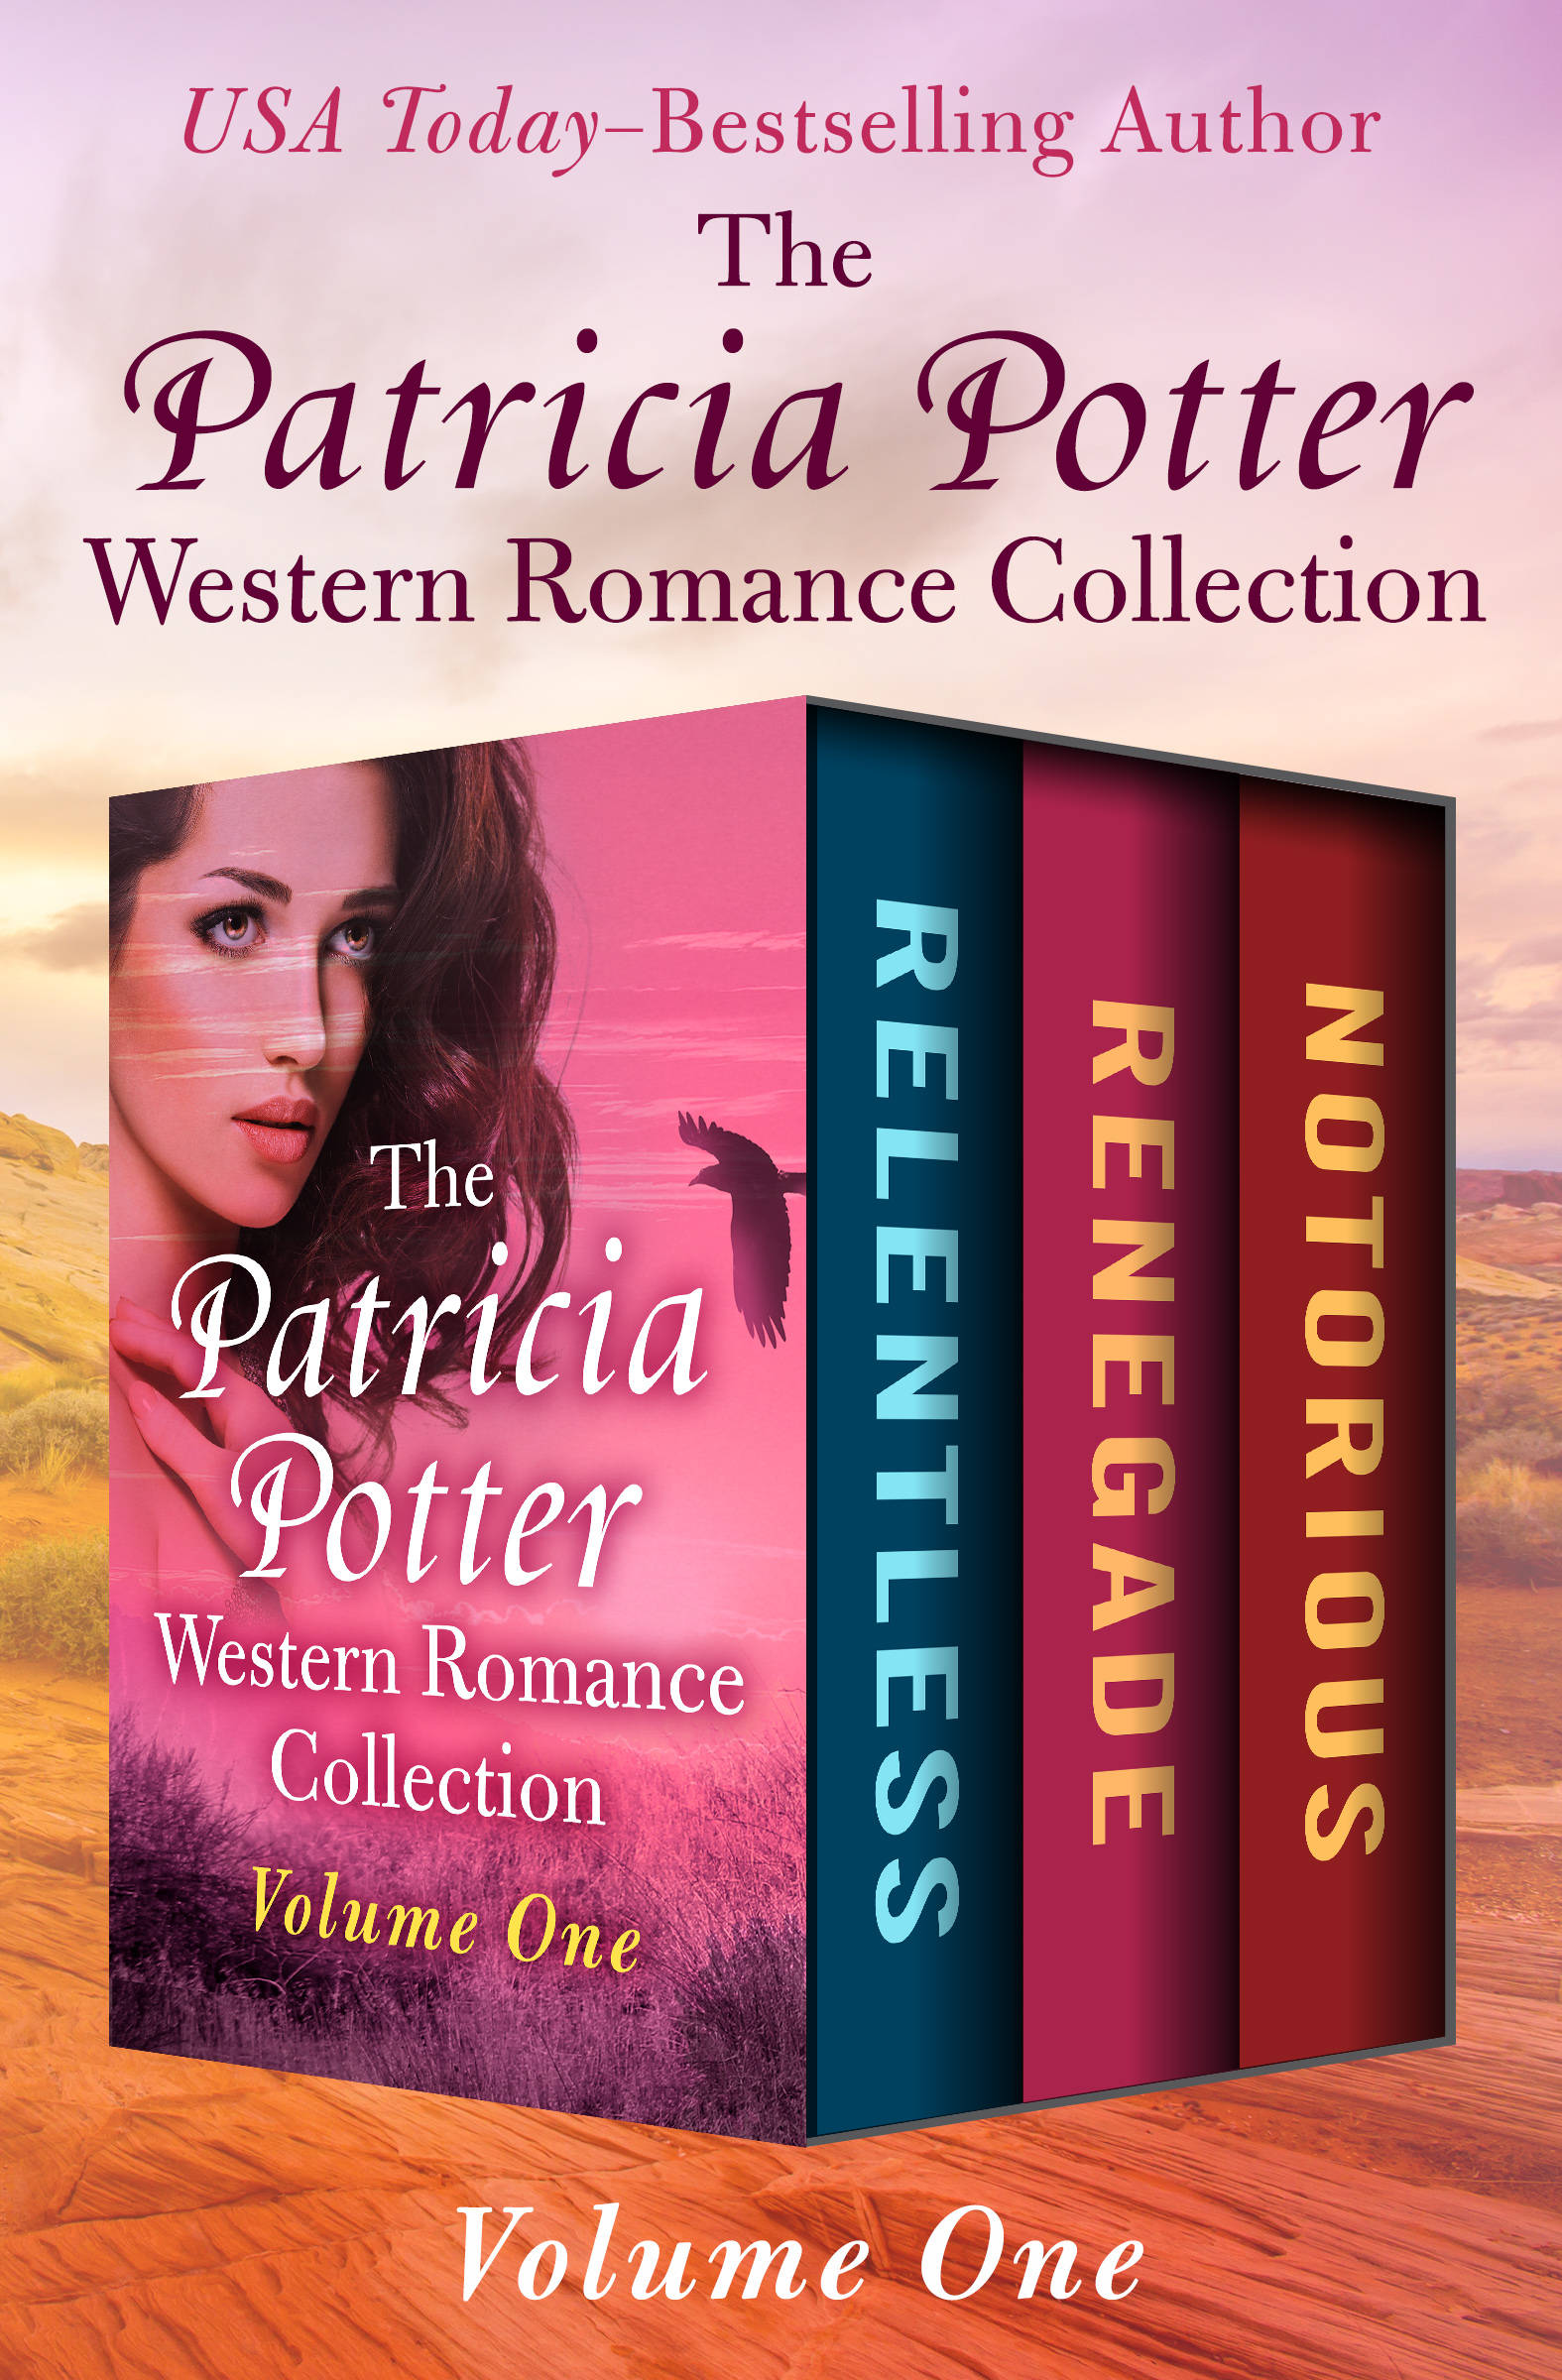 Patricia Potter Western Romance Collection Volume One